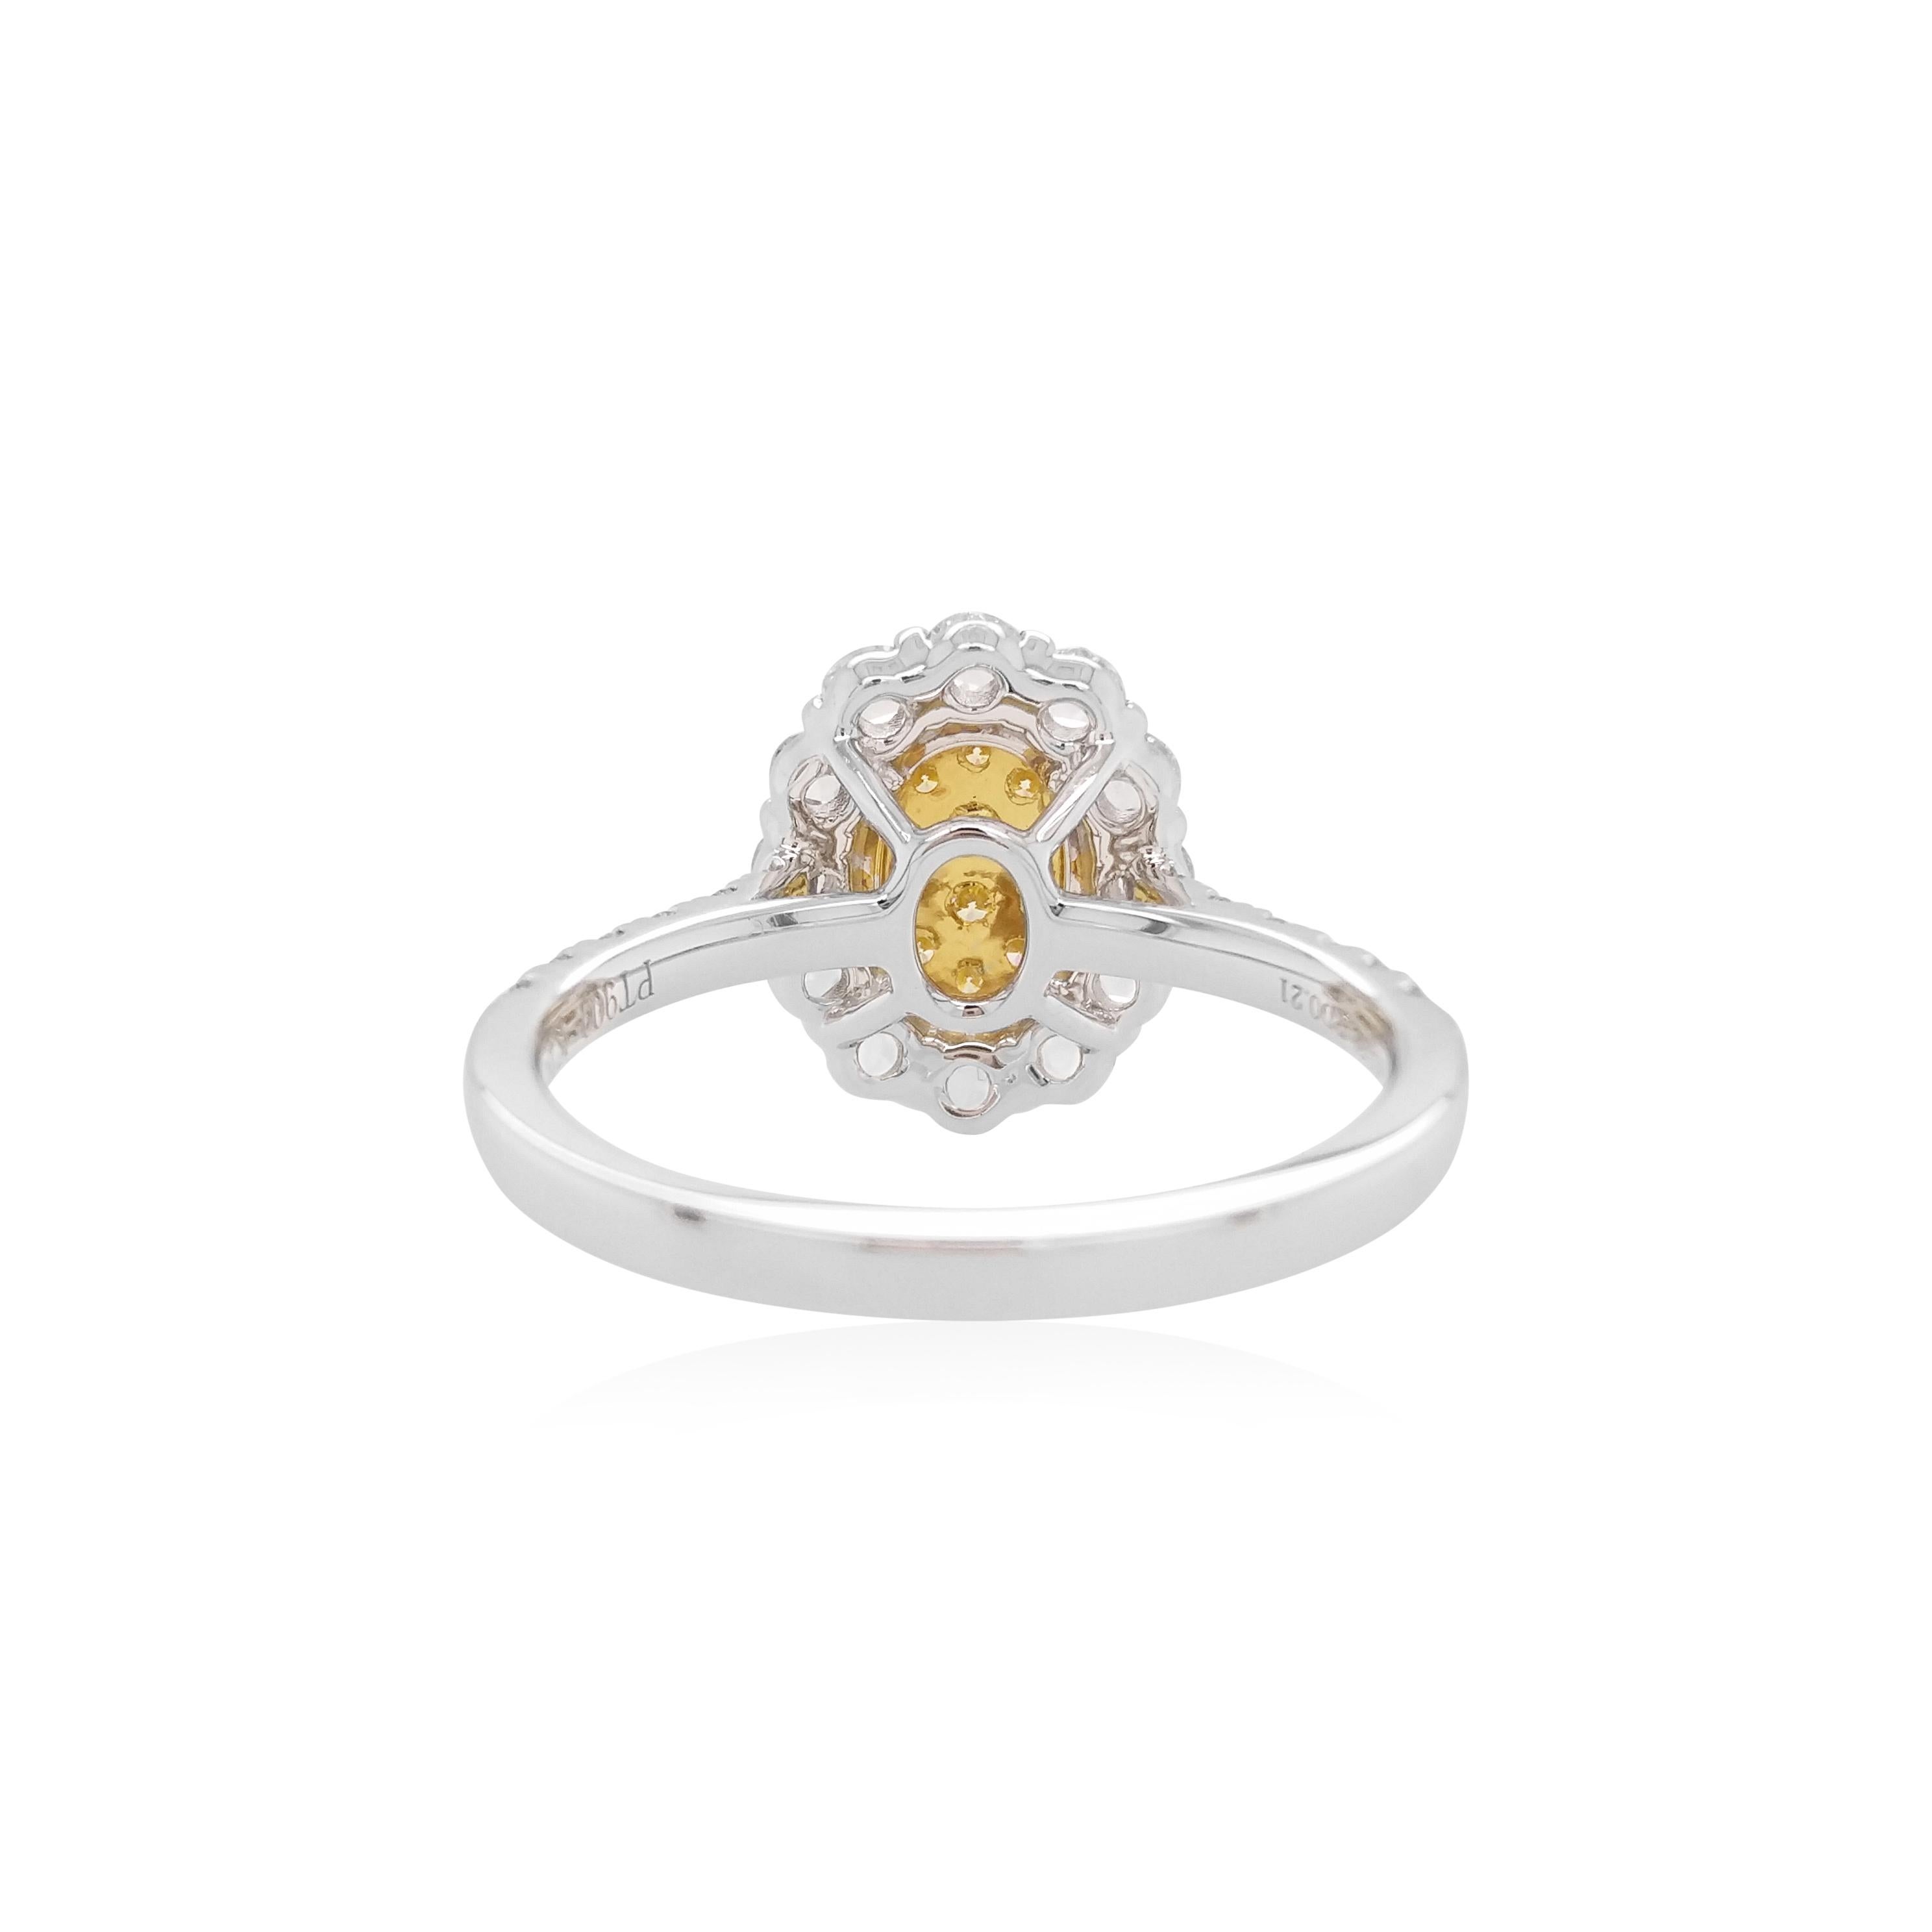 This mesmeric platinum ring features natural Yellow diamonds at its forefront, accentuated by a halo of glistening Rose-cut white diamonds which surrounds it. Bold, yet intricate, this one-of-a-kind ring will add a sumptuous touch of colour to your